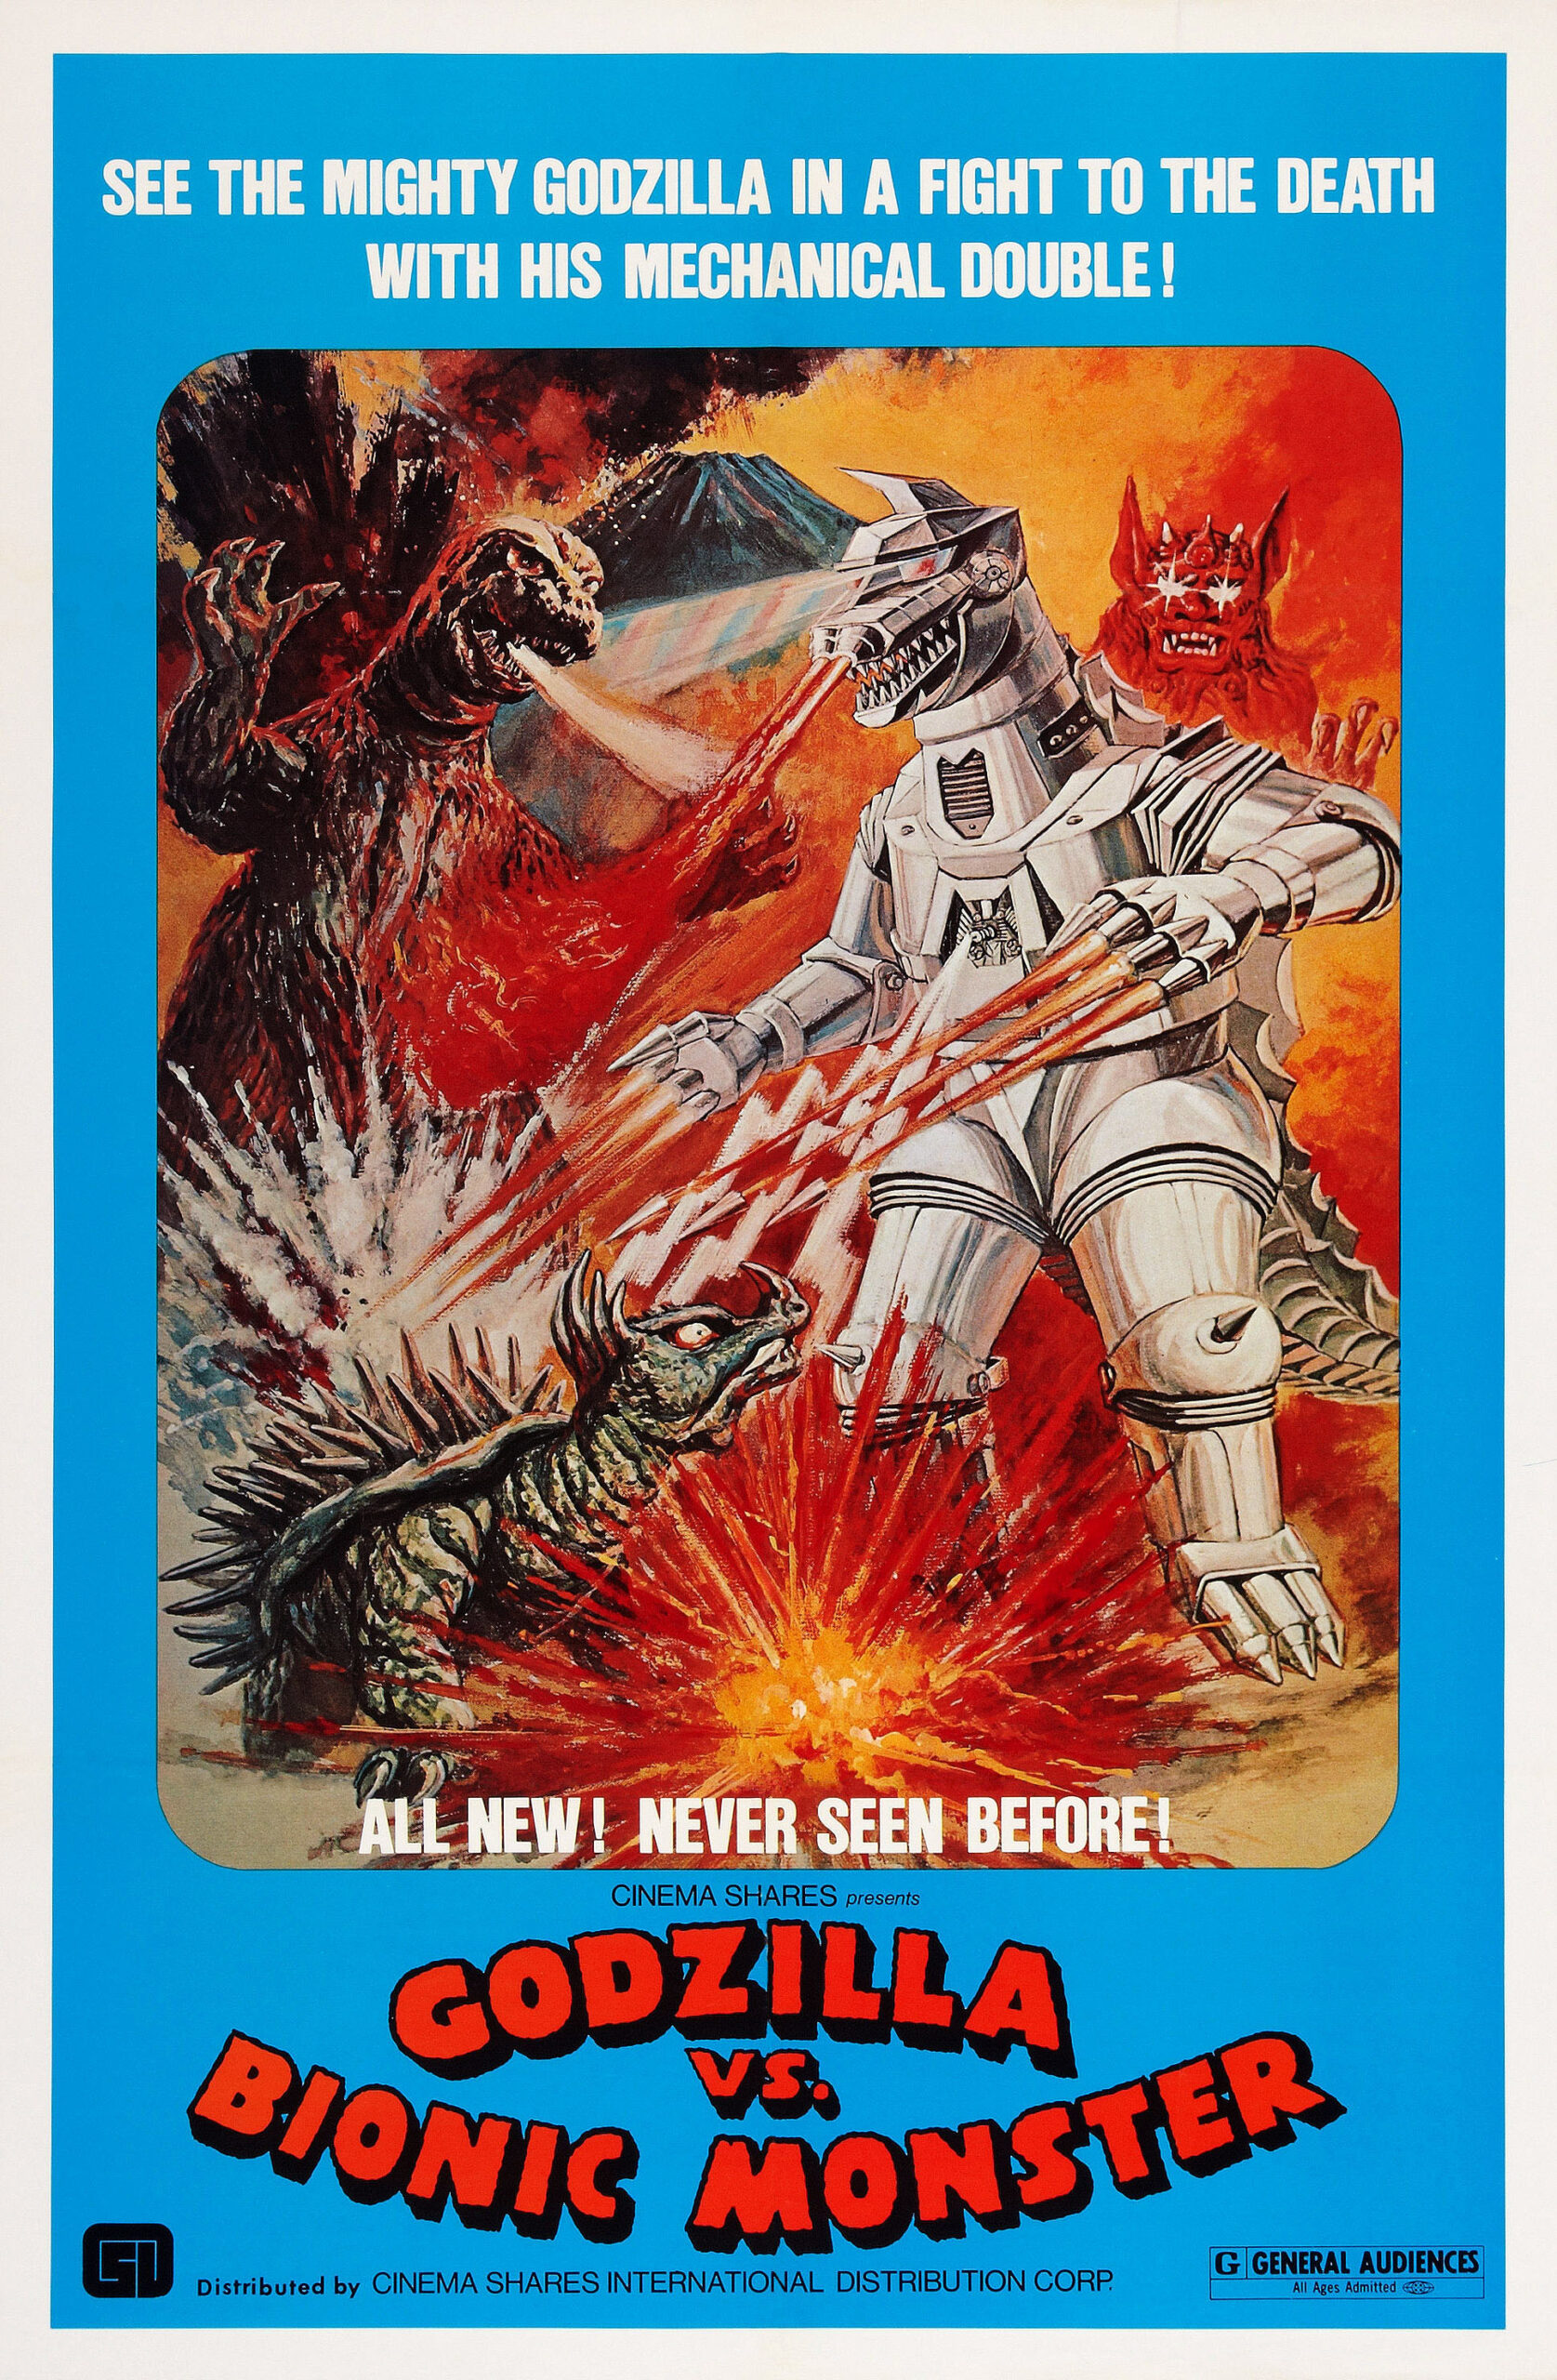 U.S. poster for the 1974 movie "Godzilla vs. Mechagodzilla," but titled in this release as "Godzilla vs. the Bionic Monster." It features an image from the Japanese poster of Godzilla, Anguirus and King Caesar battling the robotic Mechagodzilla against the backdrop of an erupting volcano. That illustration is bordered with a light blue background. On top, in white lettering, reads: "See the Mighty Godzilla in a Fight to the Death With His Mechanical Double!" At the bottom, in red lettering, reads: "Godzilla vs. the Bionic Monster"